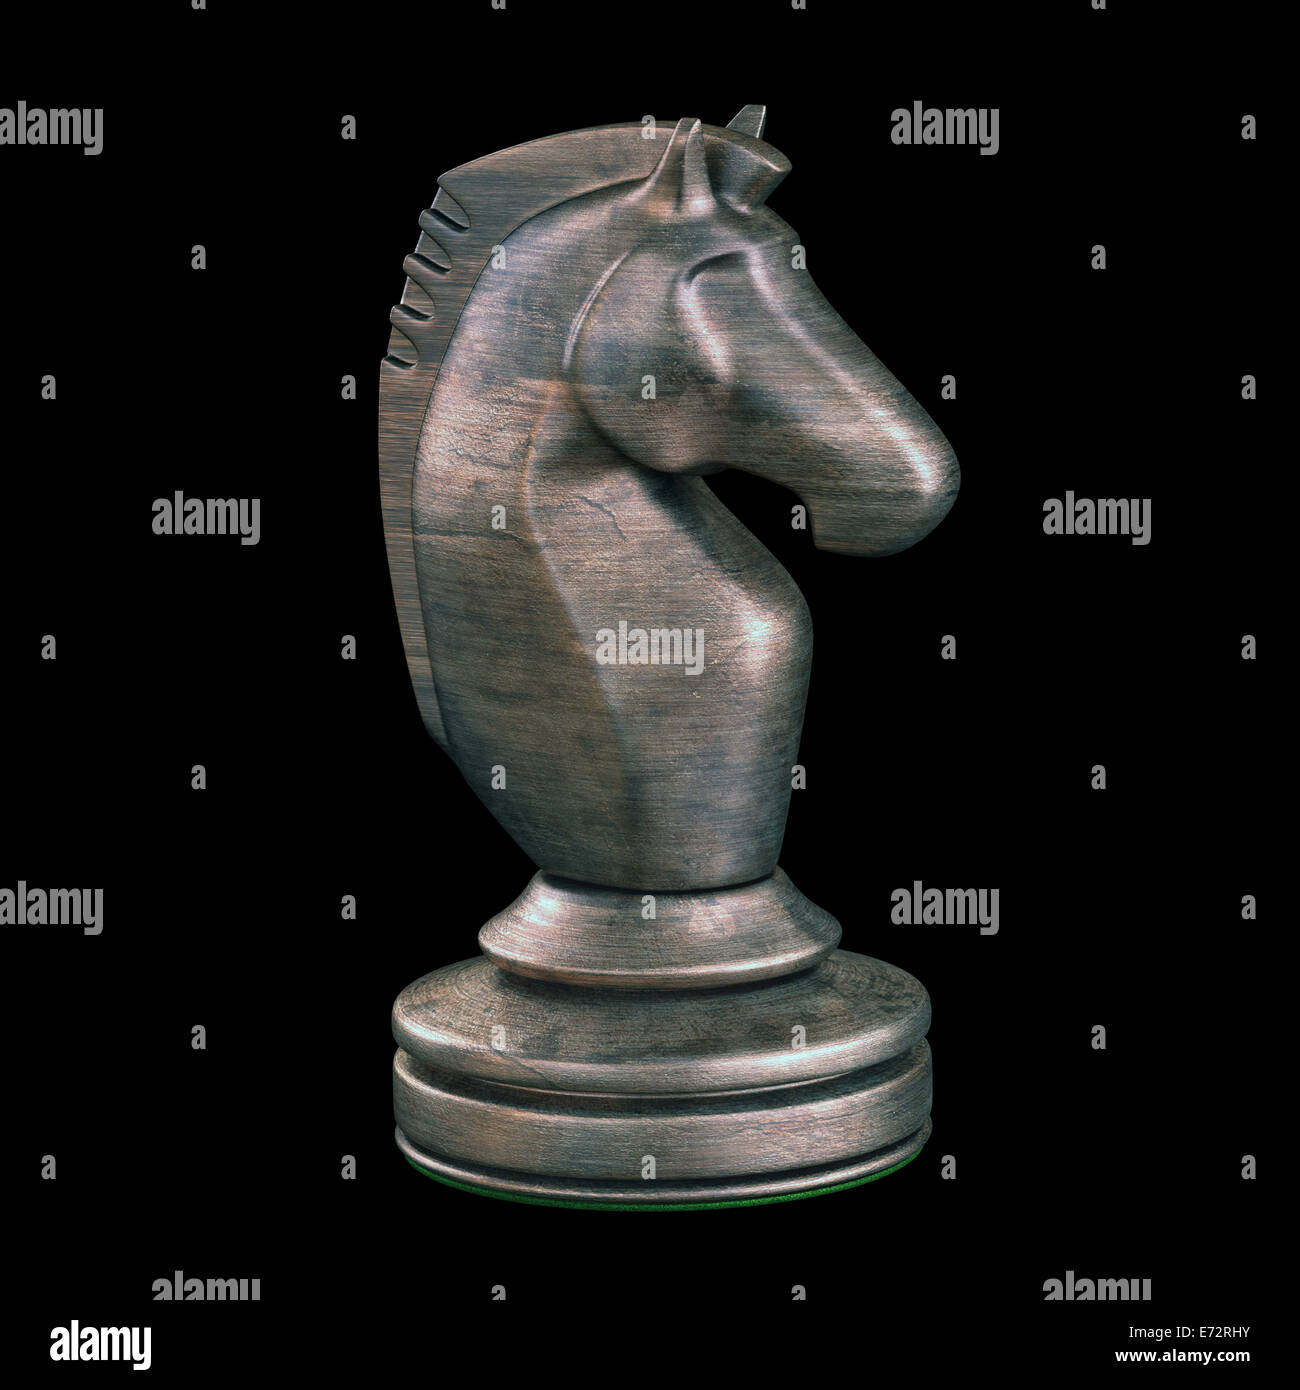 Metal chess piece isolated. Clipping path included. Stock Photo